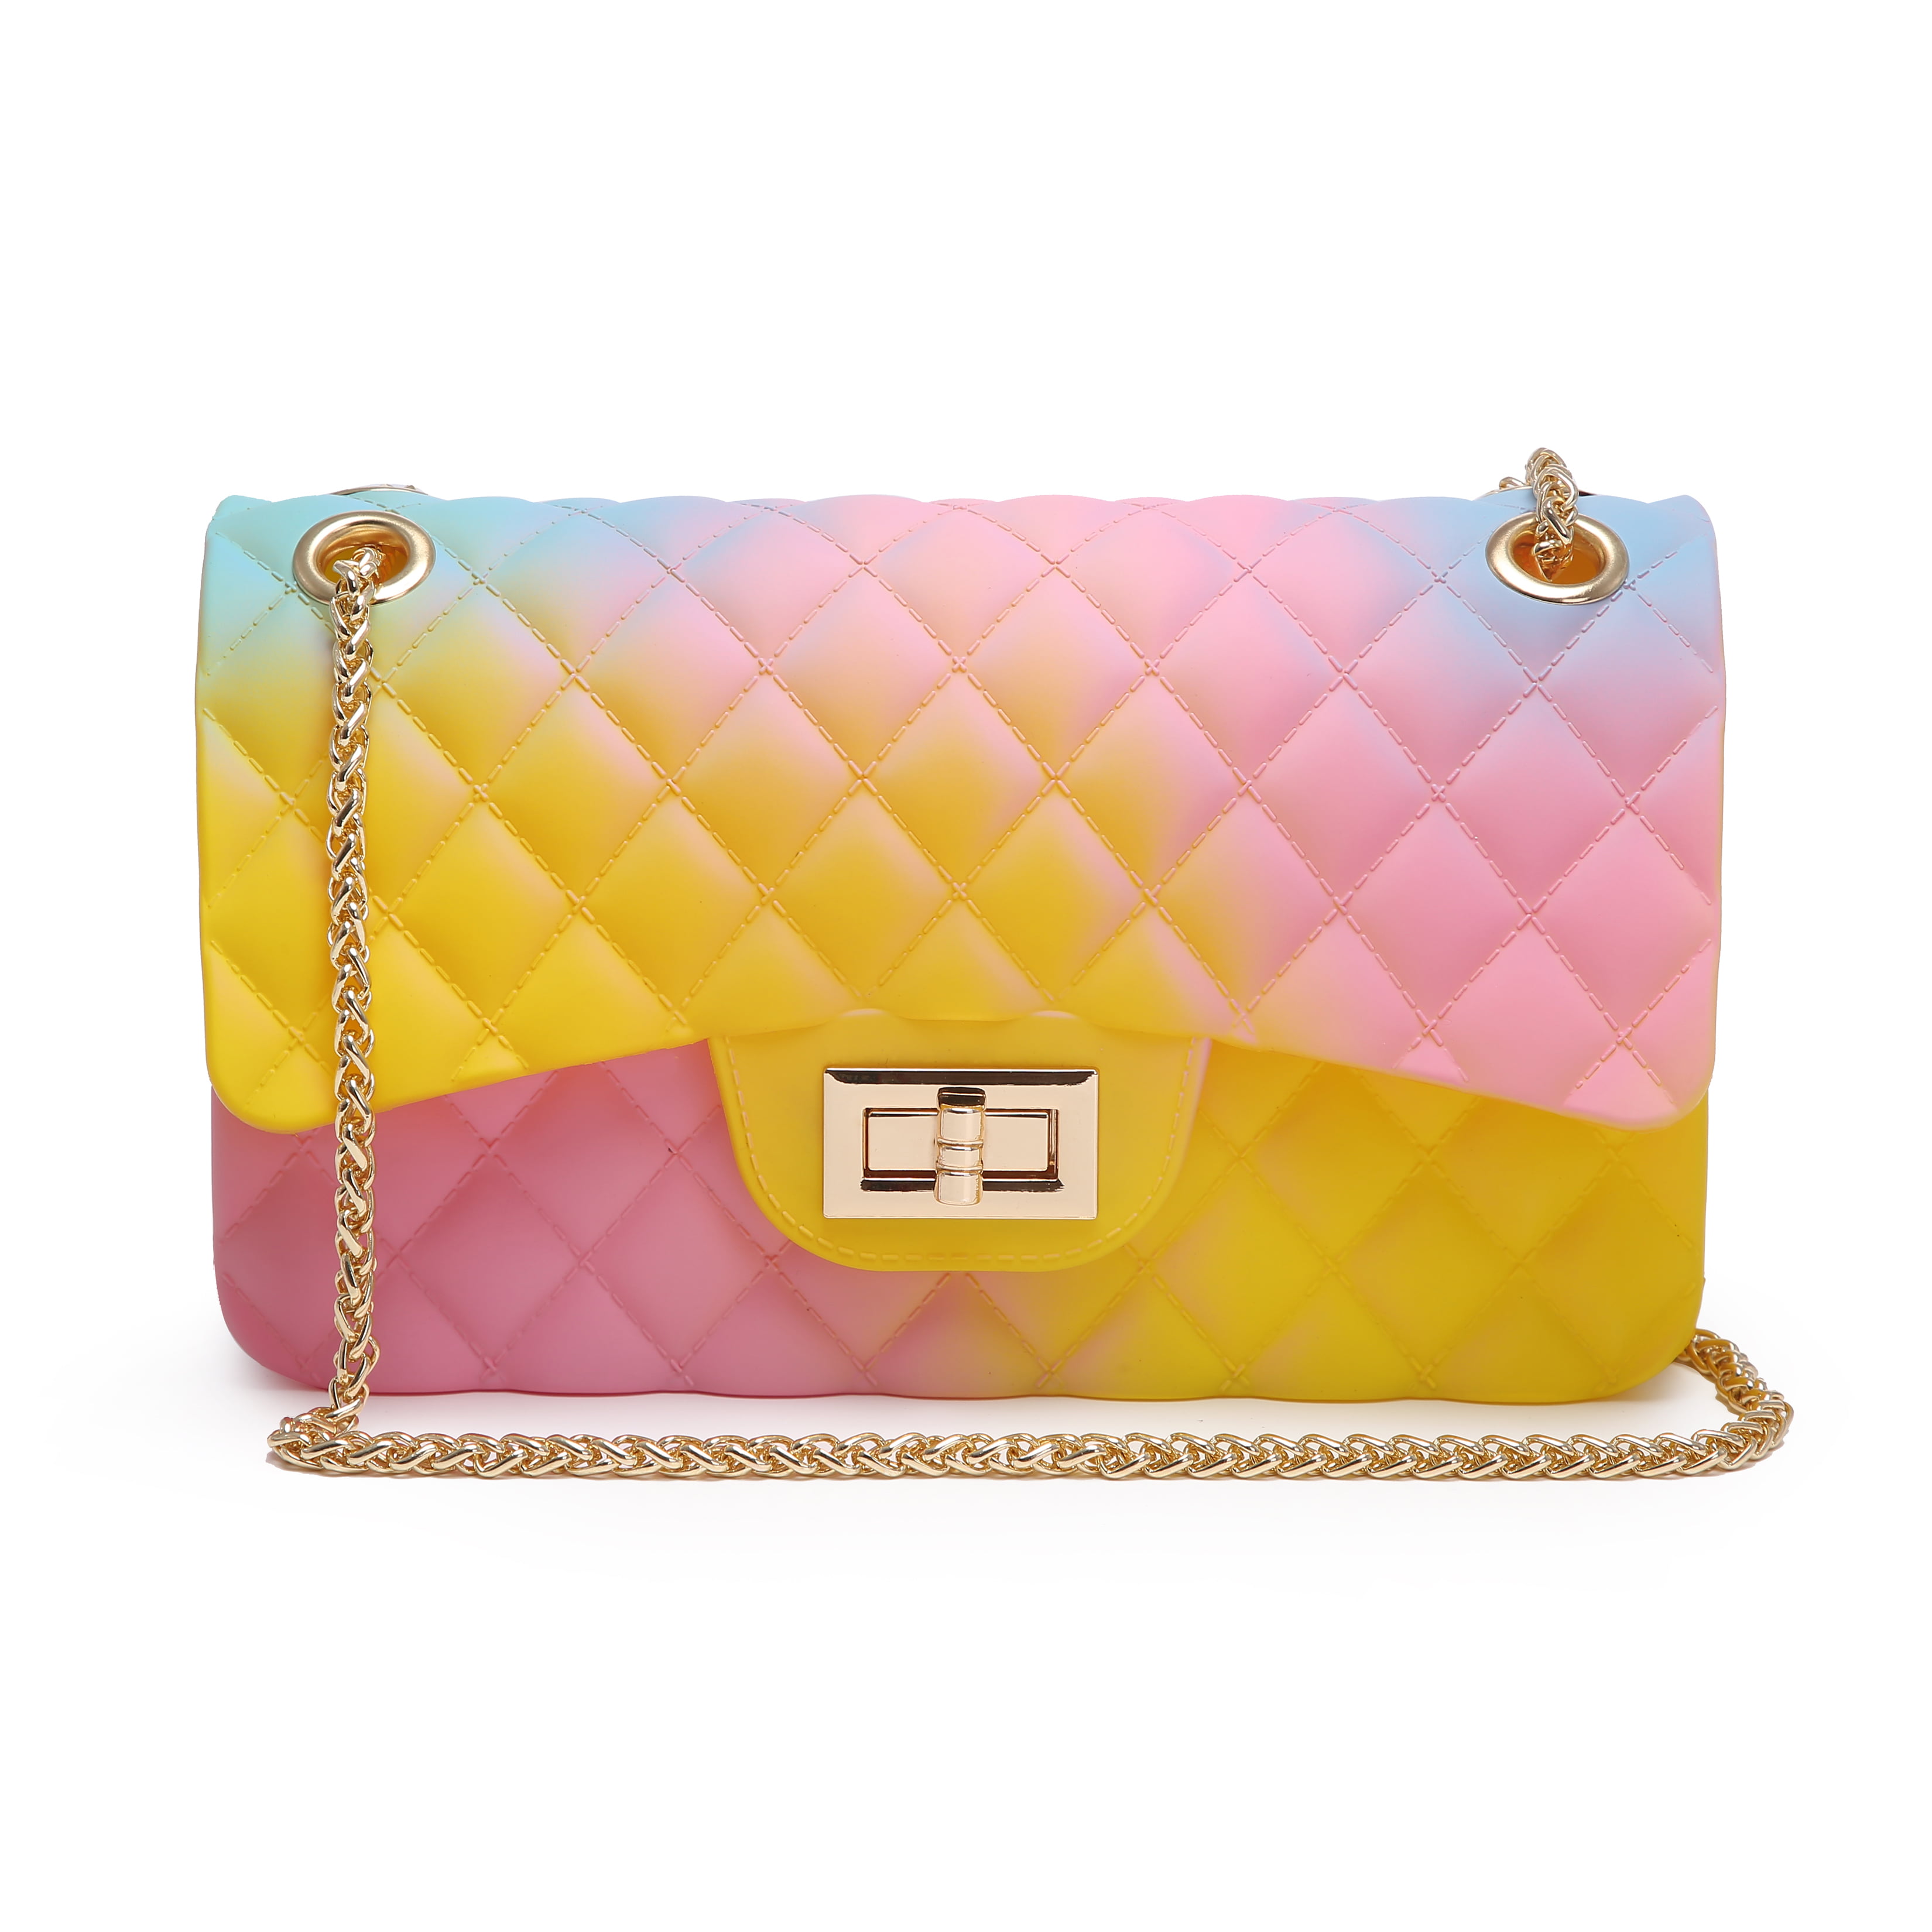 Poppy Fashion Rainbow Color Quilted Jelly Bag PVC Crossbody Shoulder ...